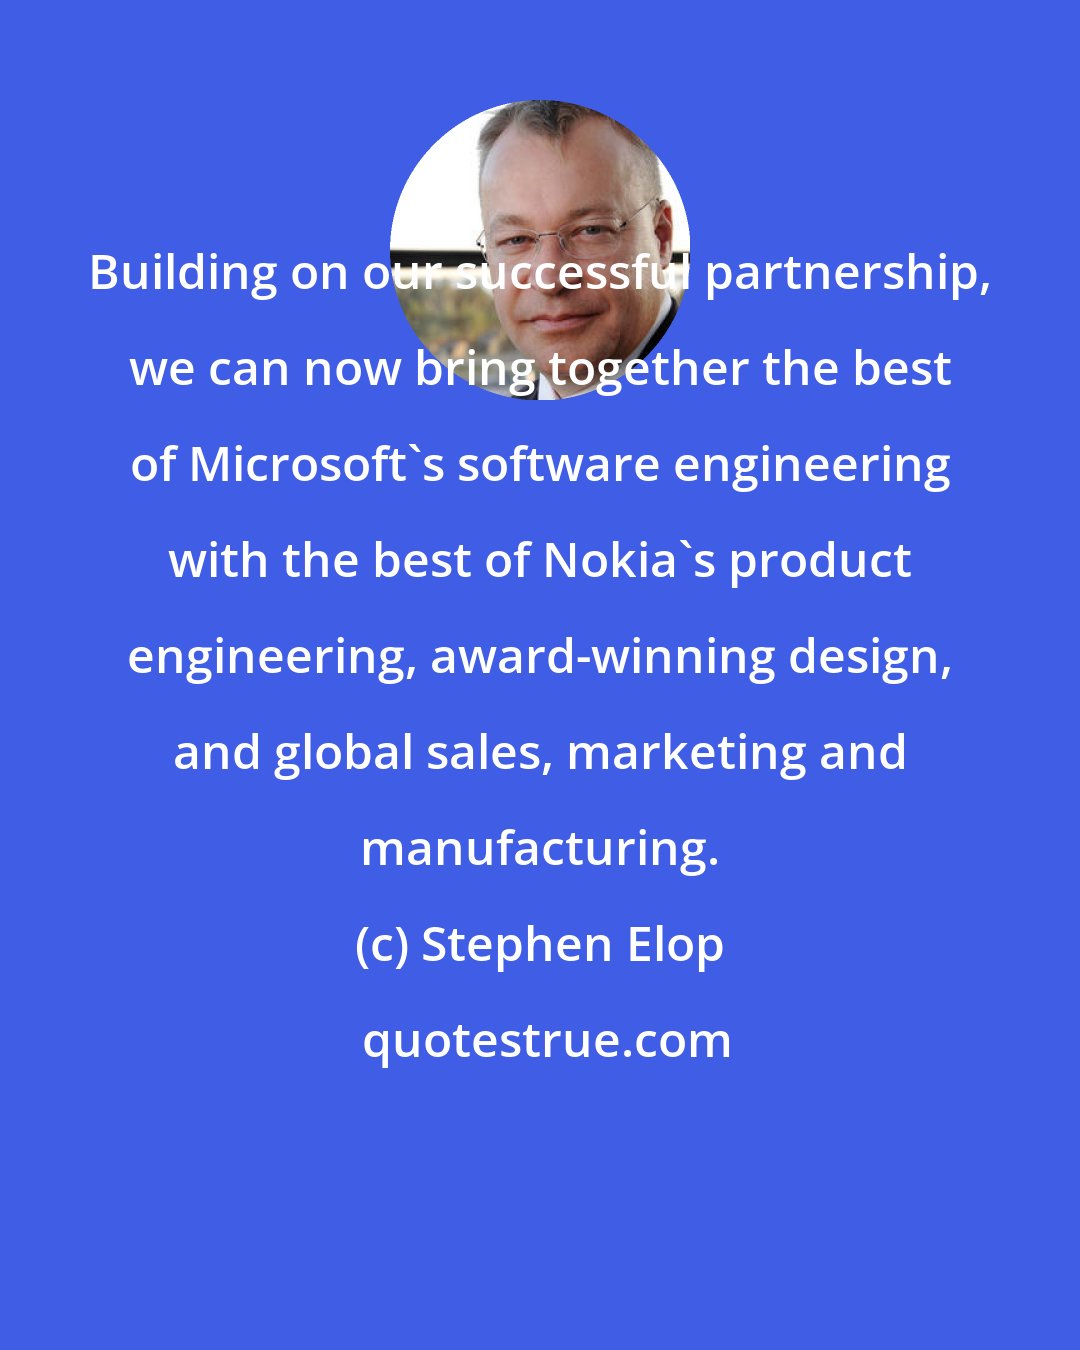 Stephen Elop: Building on our successful partnership, we can now bring together the best of Microsoft's software engineering with the best of Nokia's product engineering, award-winning design, and global sales, marketing and manufacturing.